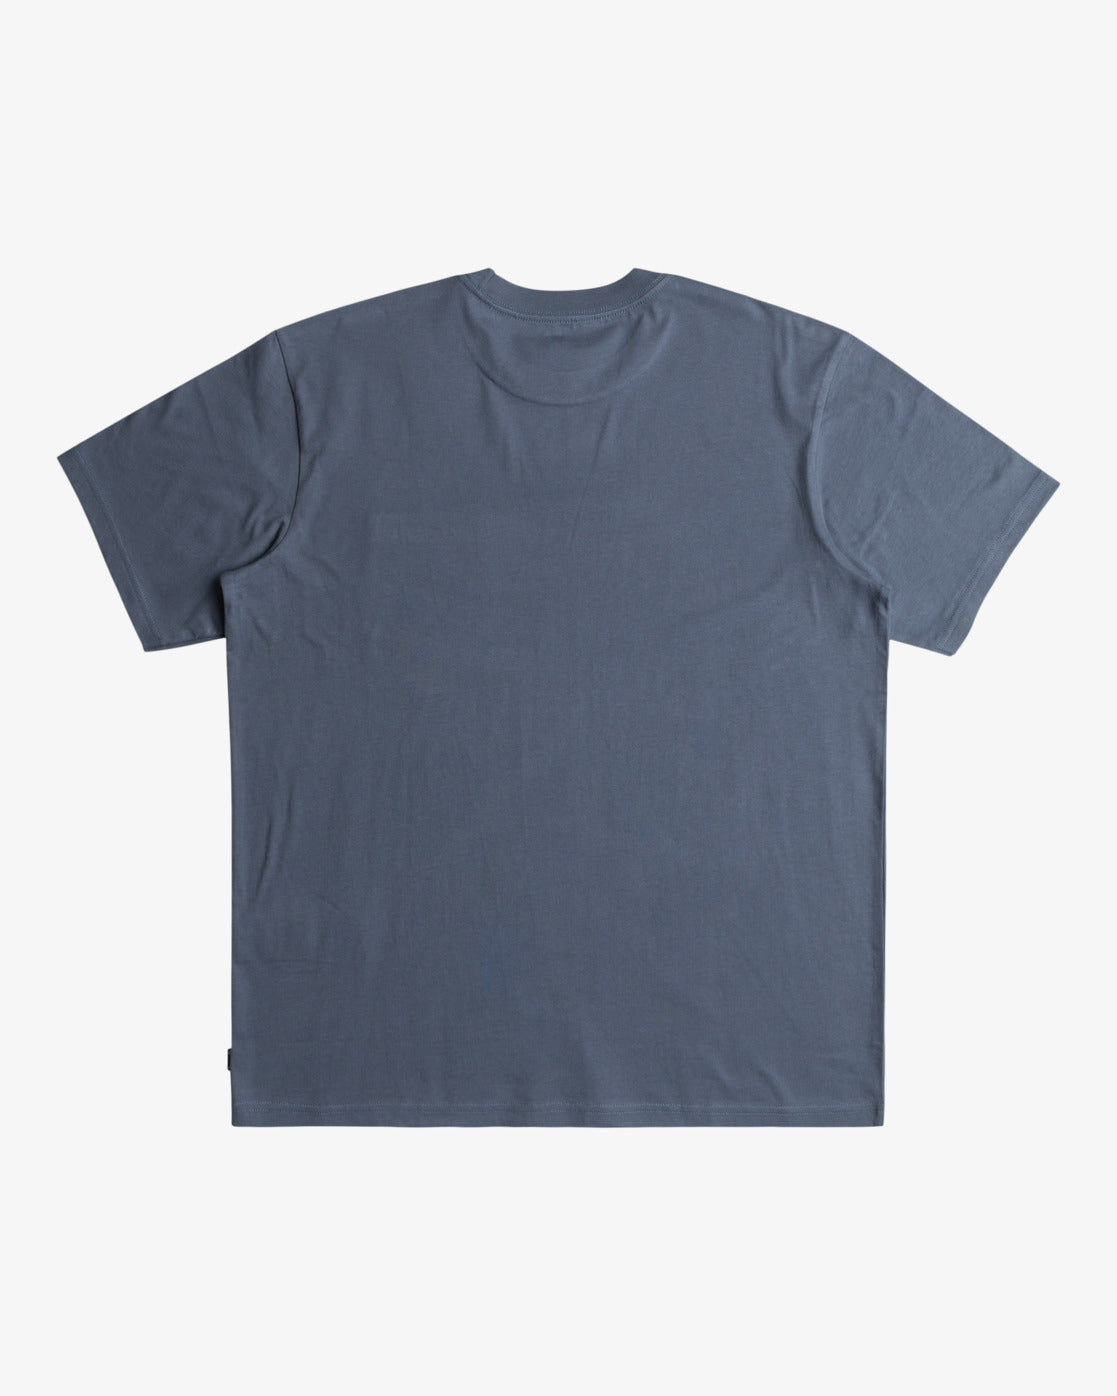 Billabong Stacked Arch T-Shirt in Slate Blue